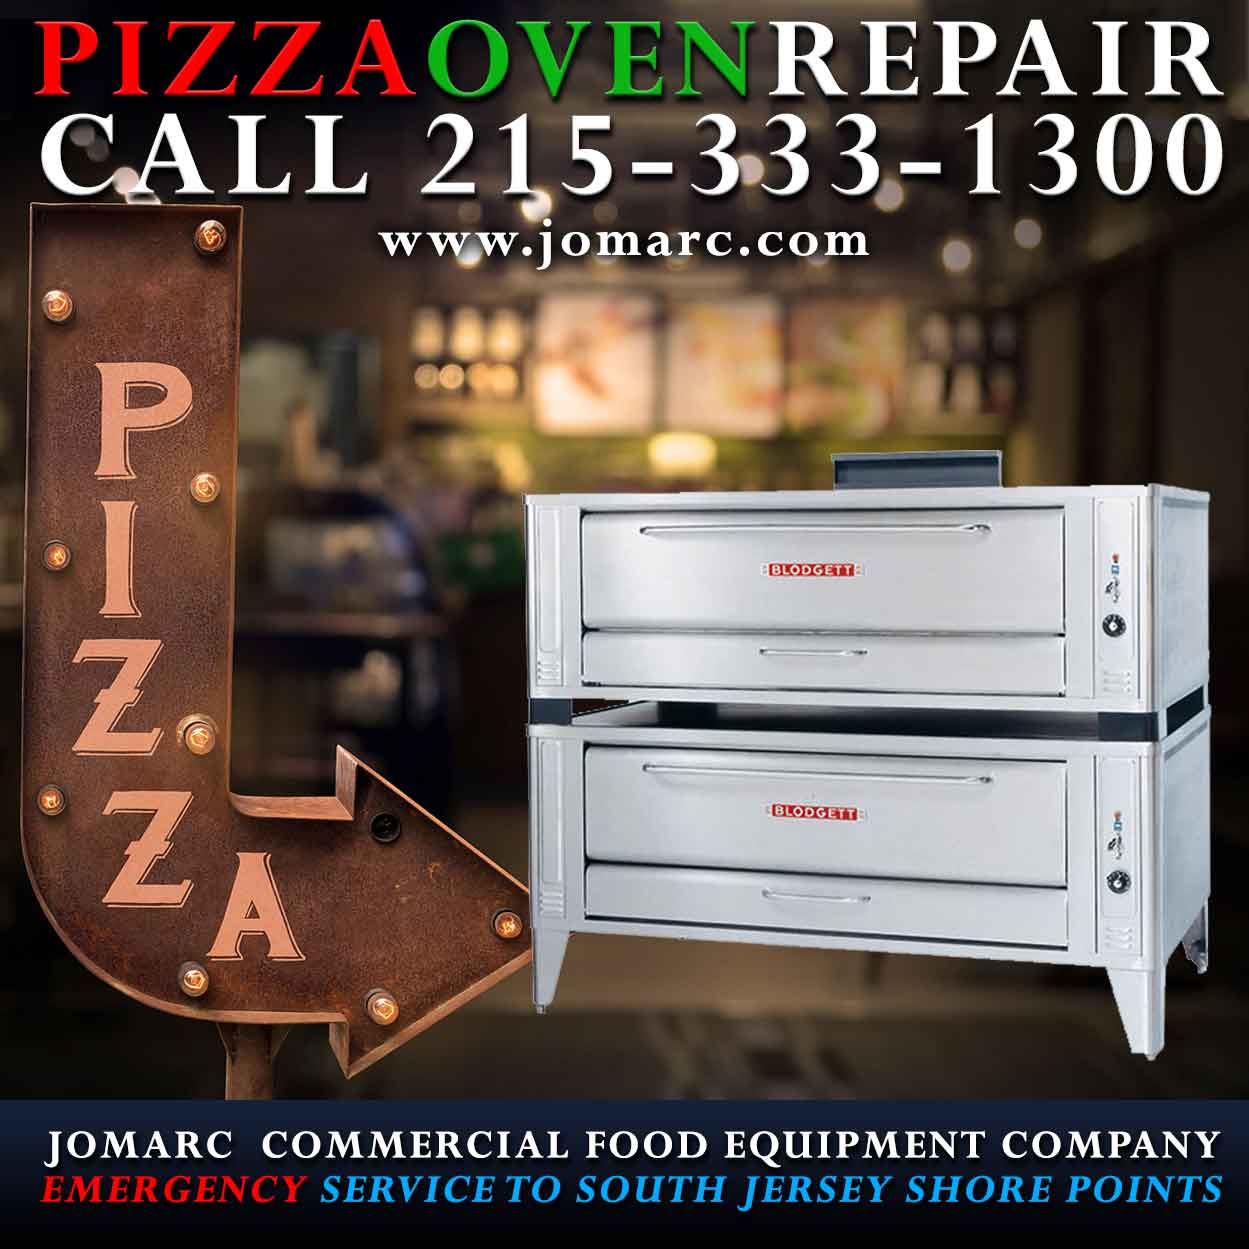 Gas, Natural Gas, Electric Pizza Oven Repair Bucks County Philadelphia Delaware Montgomery, Pizza Deck ovens Countertop Pizza Ovens, Conveyor Ovens and Impinger Ovens, Commercial Outdoor Pizza Ovens, Bakers Pride Blodgett Avantco Equipment APW Wyott Crown Verity Global Solutions by Nemco Grindmaster-Cecilware Lincoln Nemco TurboChef Vollrath Waring Doyon Baking Equipment 